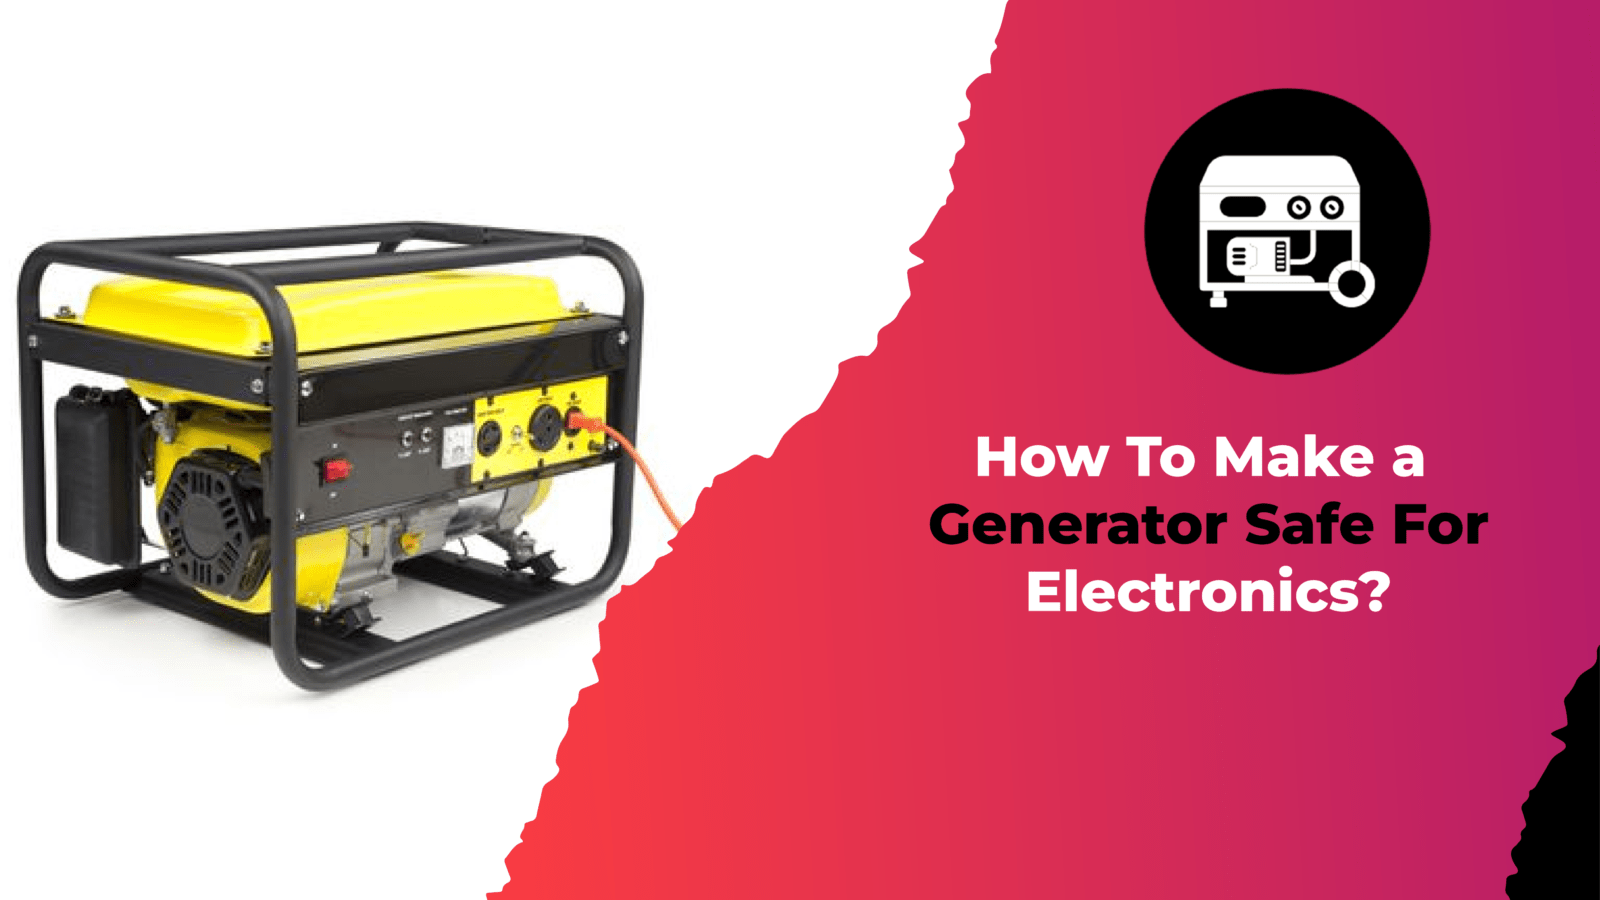 How To Make a Generator Safe For Electronics